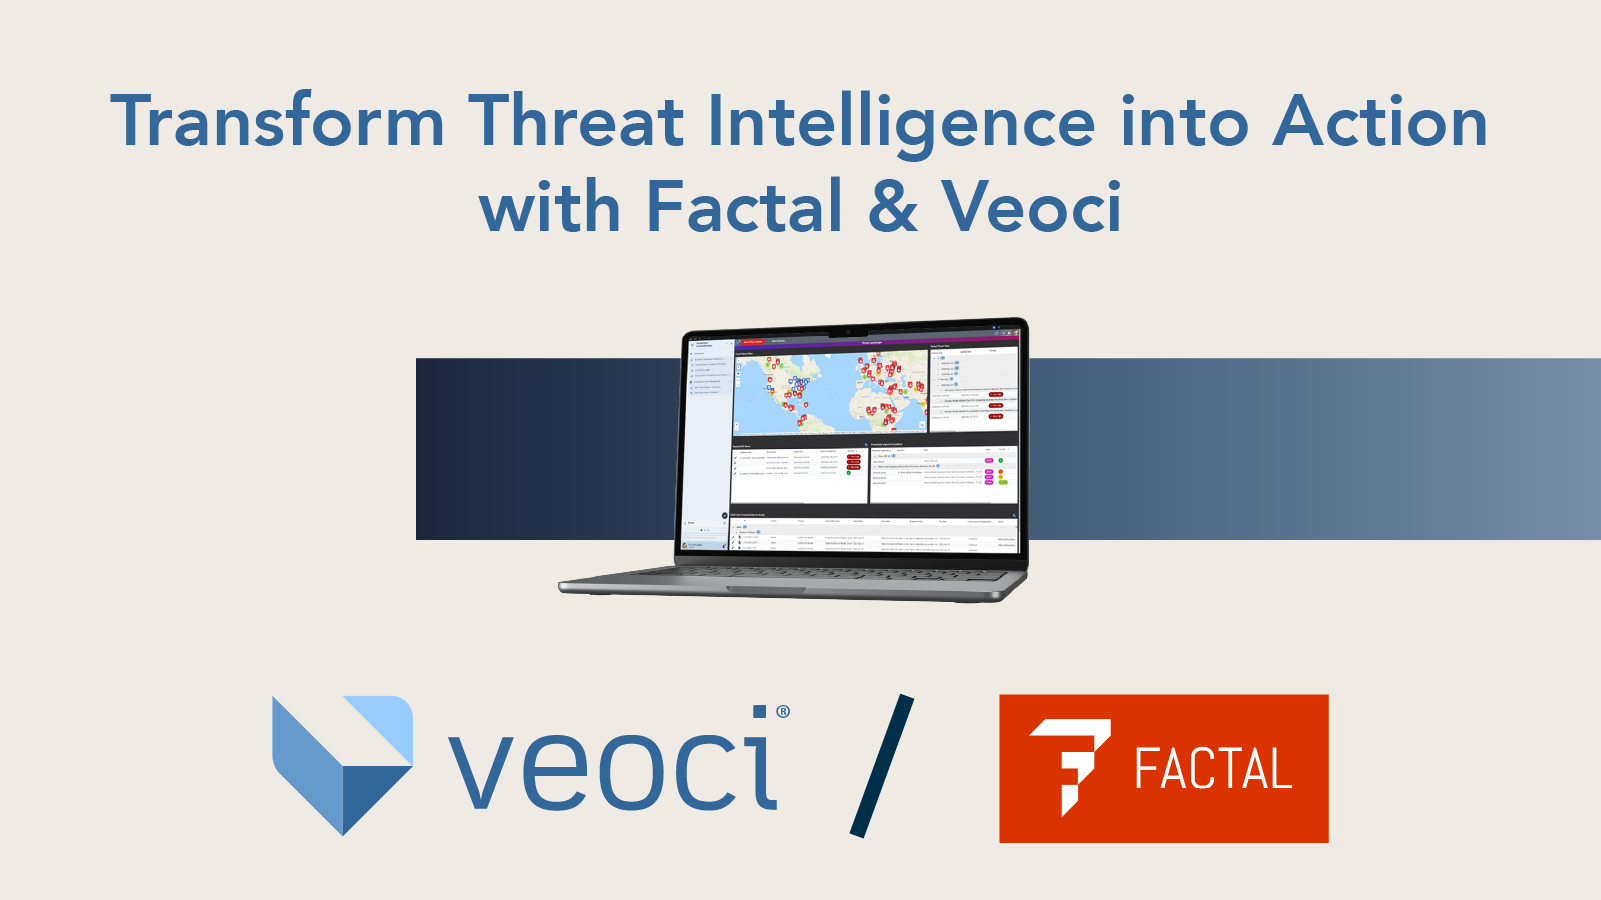 Transform Threat Intelligence into Action with Factal and Veoci